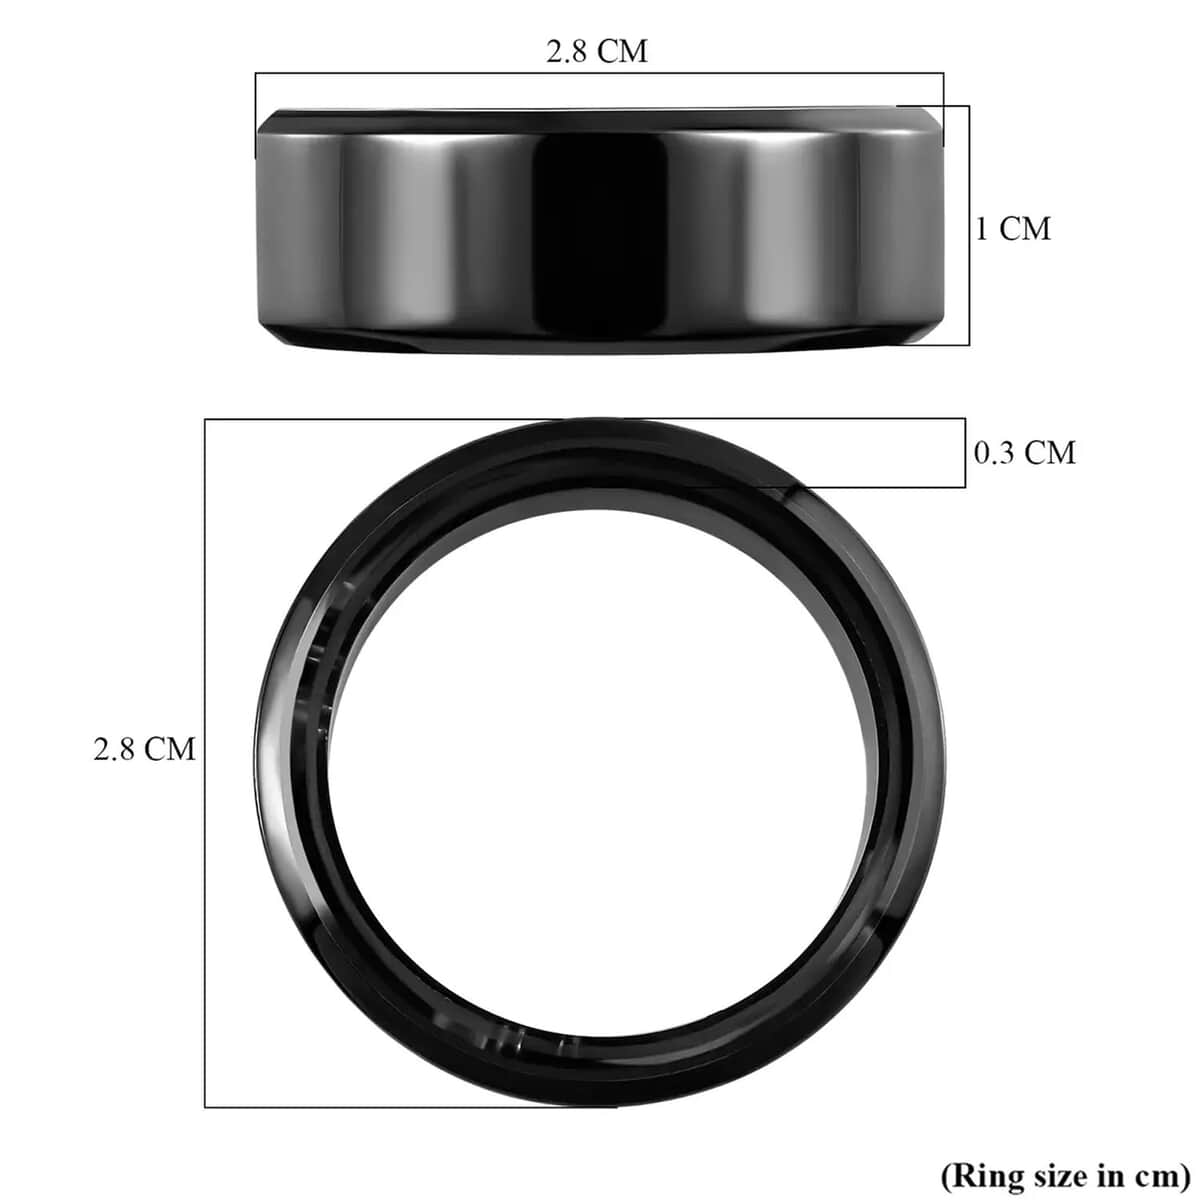 Soulsmart Multifunctional Health Tracker Smart Ring (Size 7.0) in ION Plated Black Stainless Steel (Compatible with Android 5.0+ & Apple IOS 10.0+ Systems) (Del. in 10-15 Days) image number 7